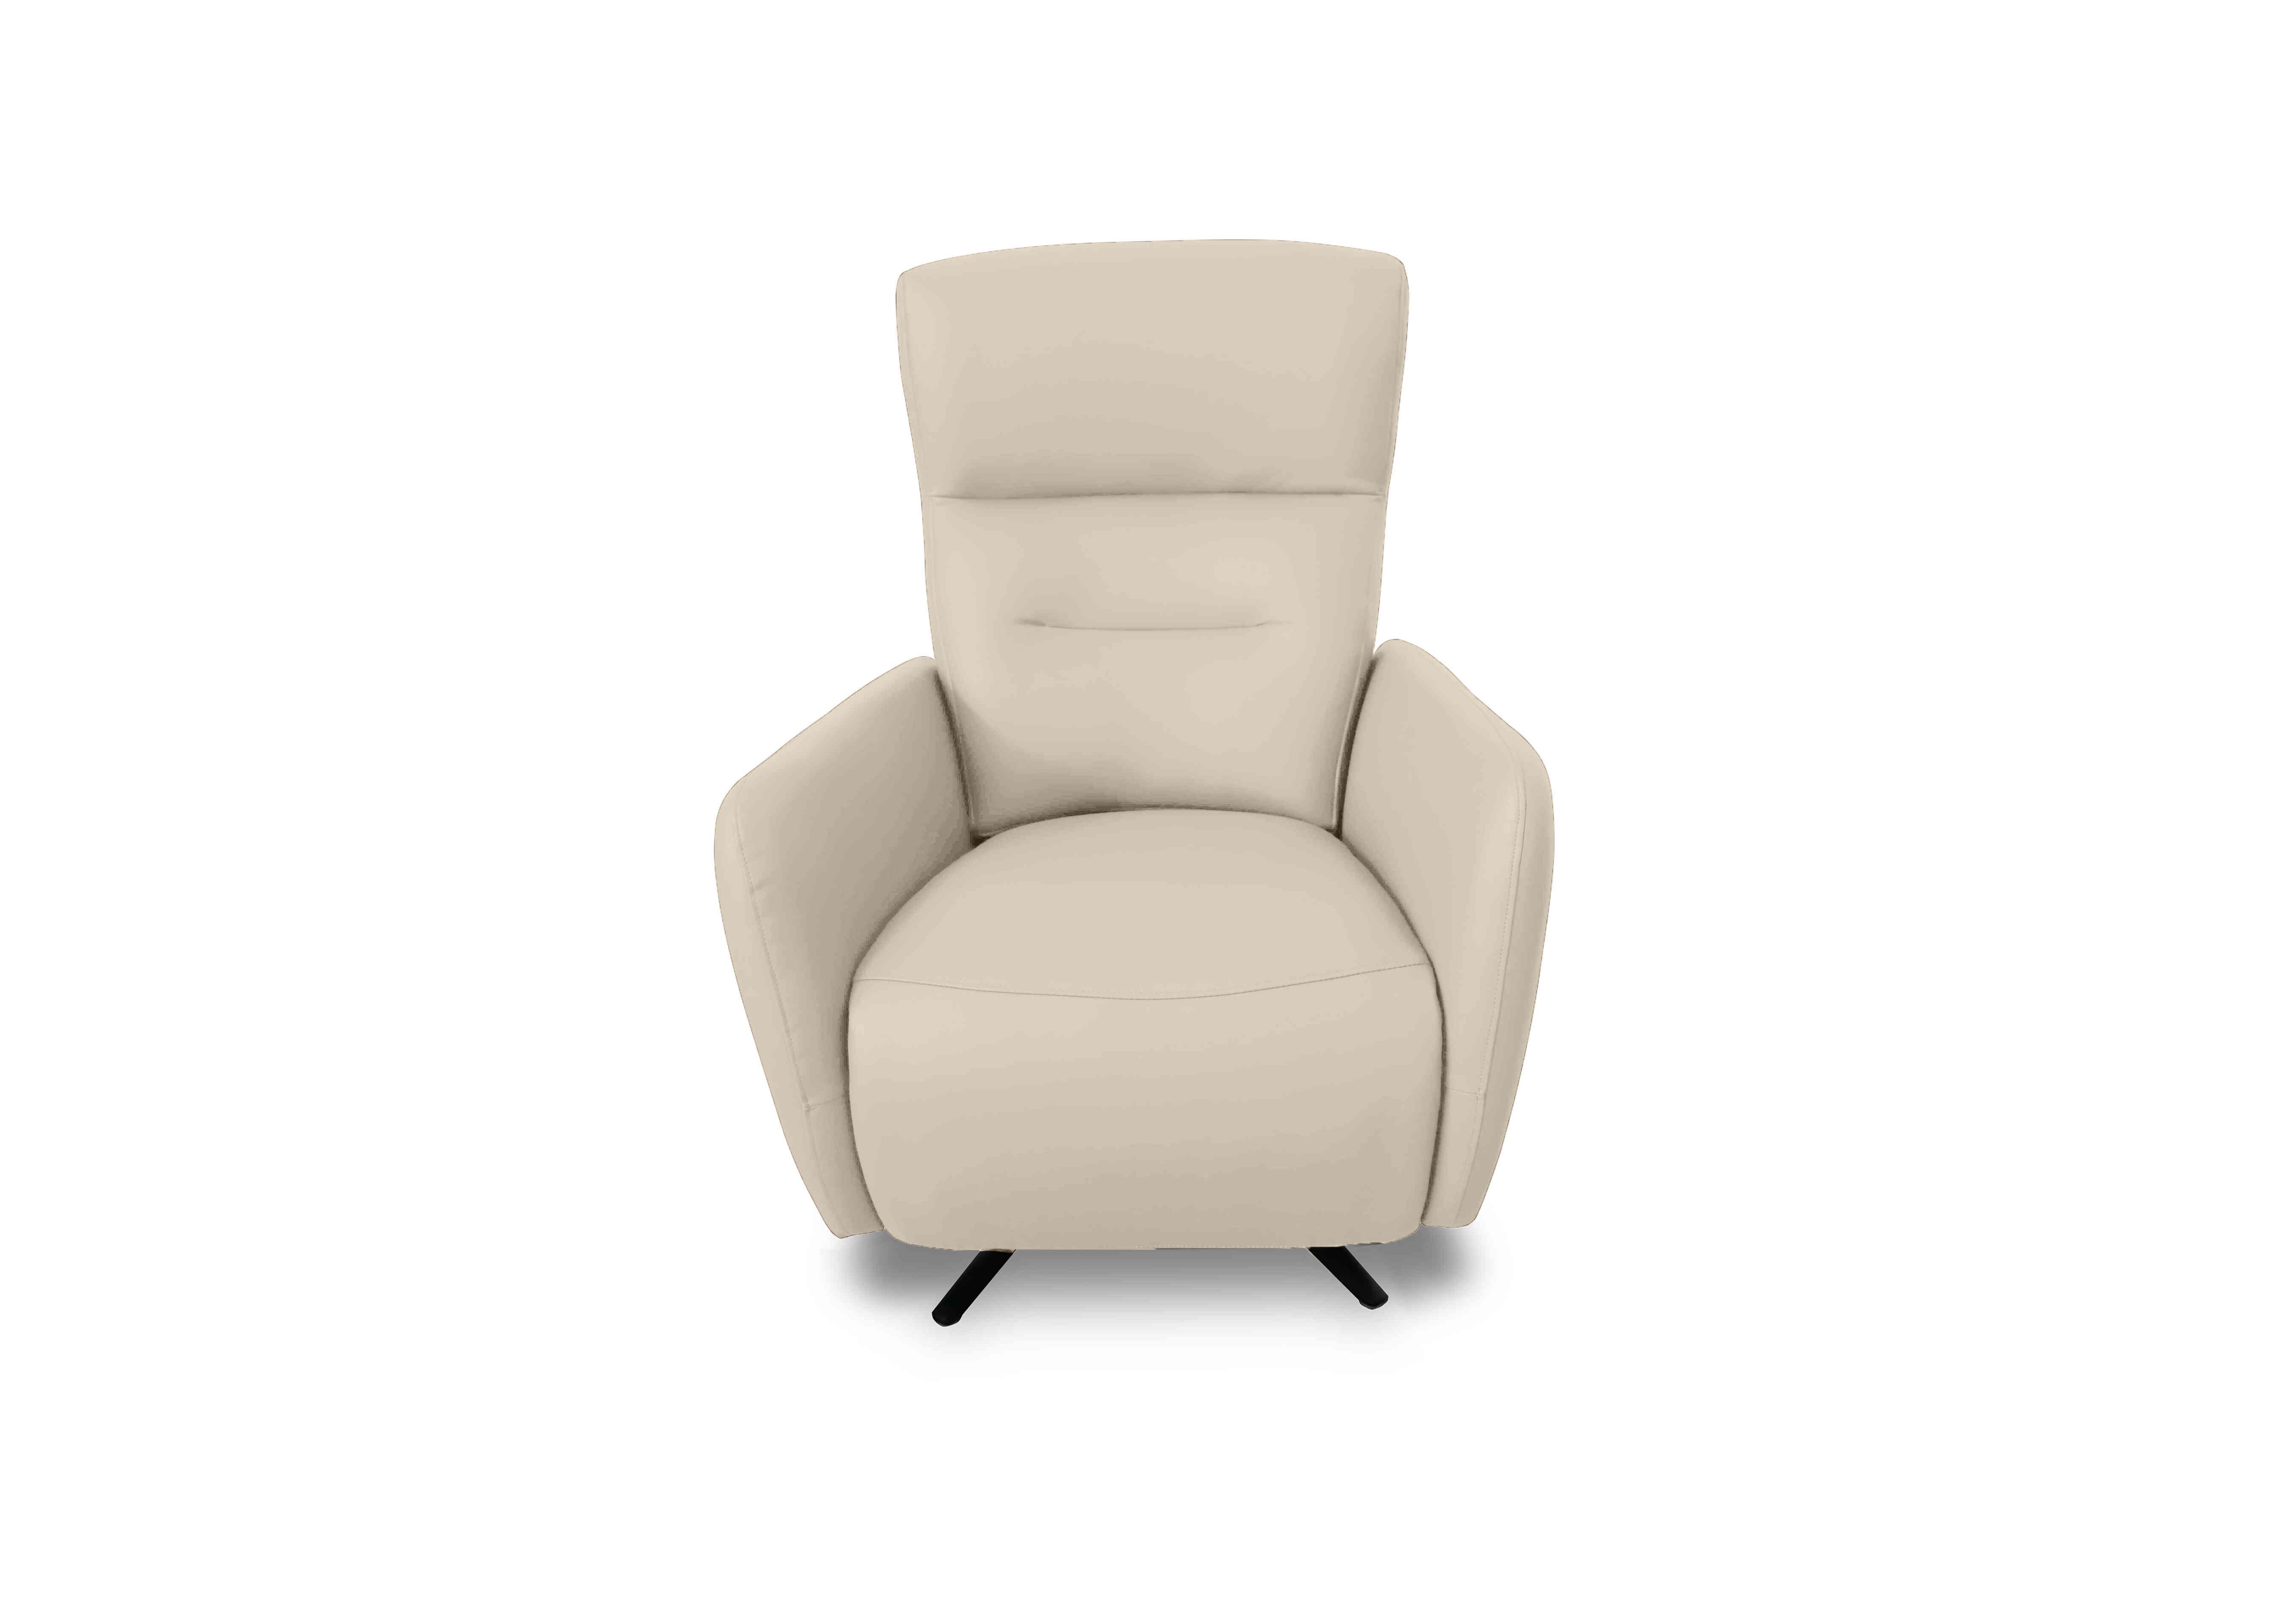 Designer Chair Collection Le Mans Leather Dual Power Recliner Swivel Chair in Nc-862c Bisque on Furniture Village